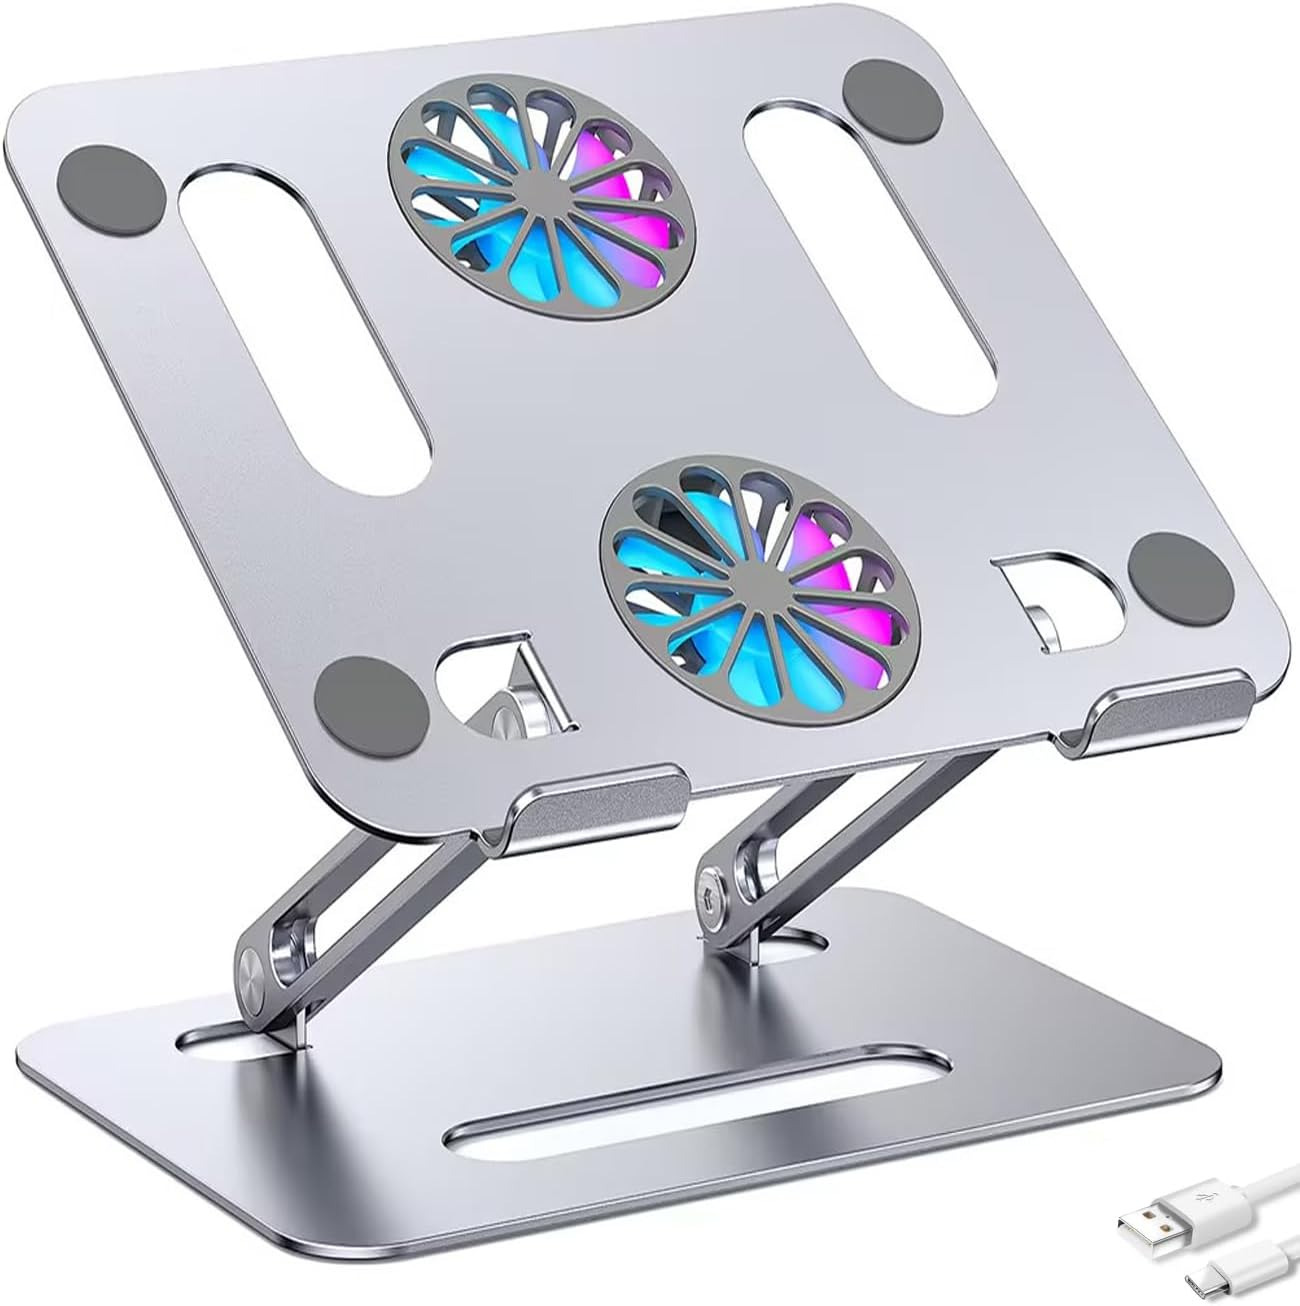 Laptop Stand with Fan Cooling | Portable & Adjustable Ventilated Aluminum Stand 